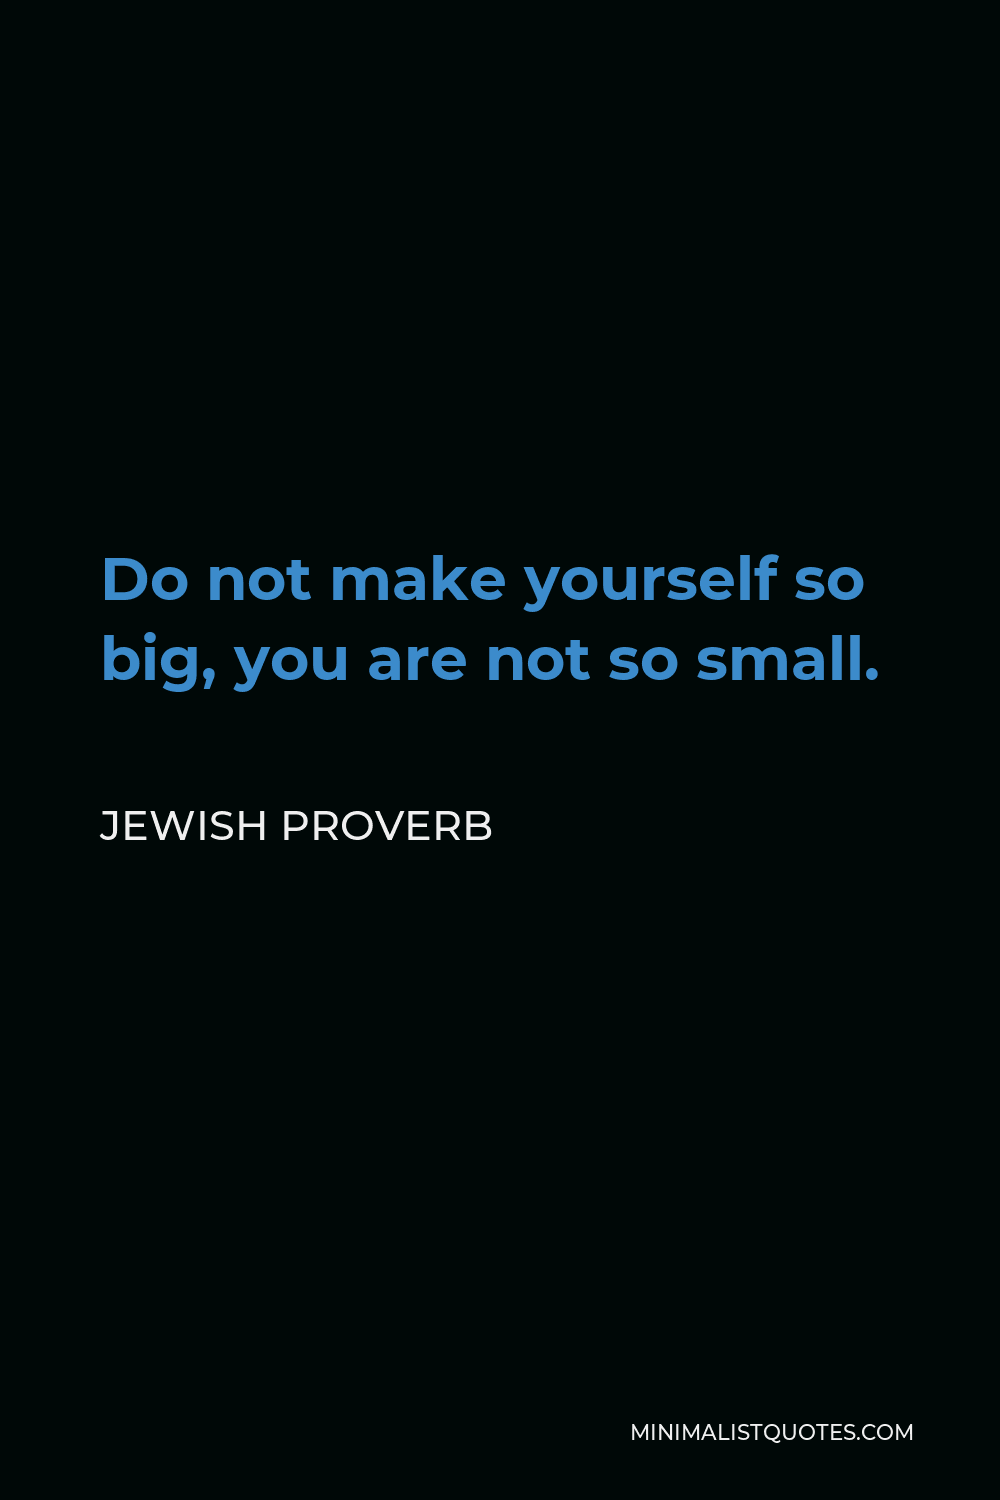 Jewish Proverb Quote - Do not make yourself so big, you are not so small.